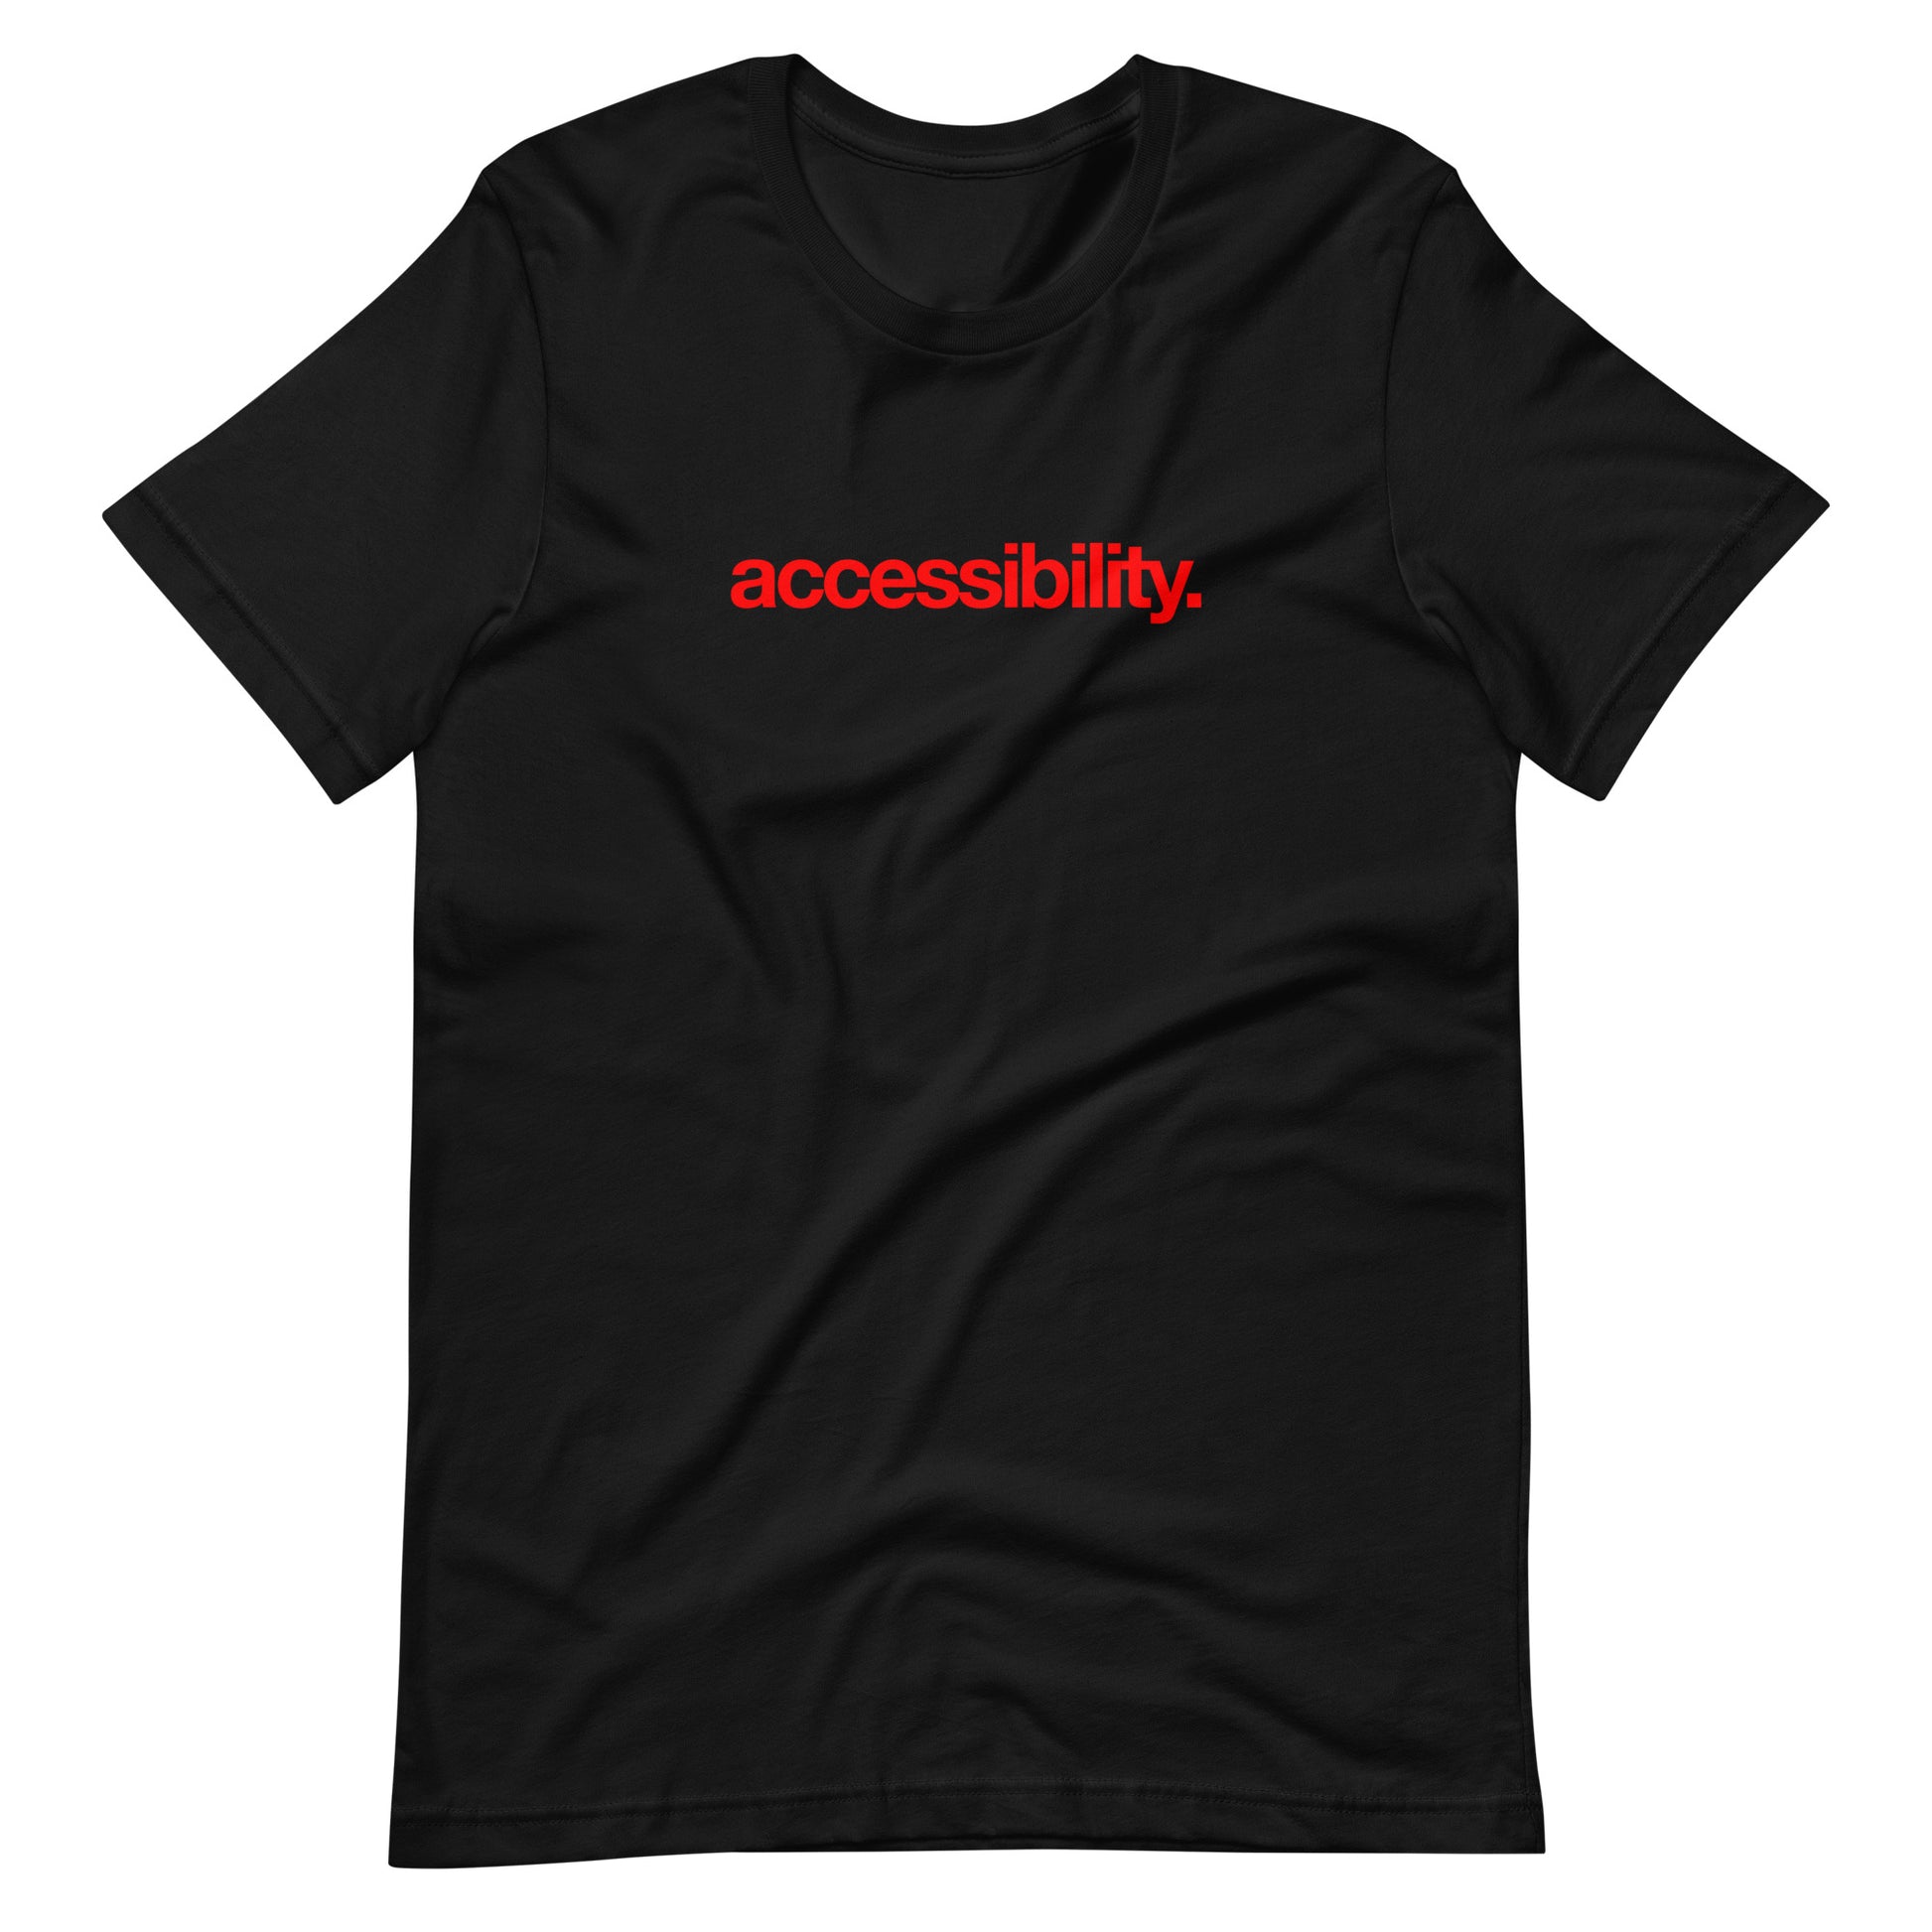 Red, accessibility, word with period in Helvetica Neue font, center aligned, on front of black t-shirt.